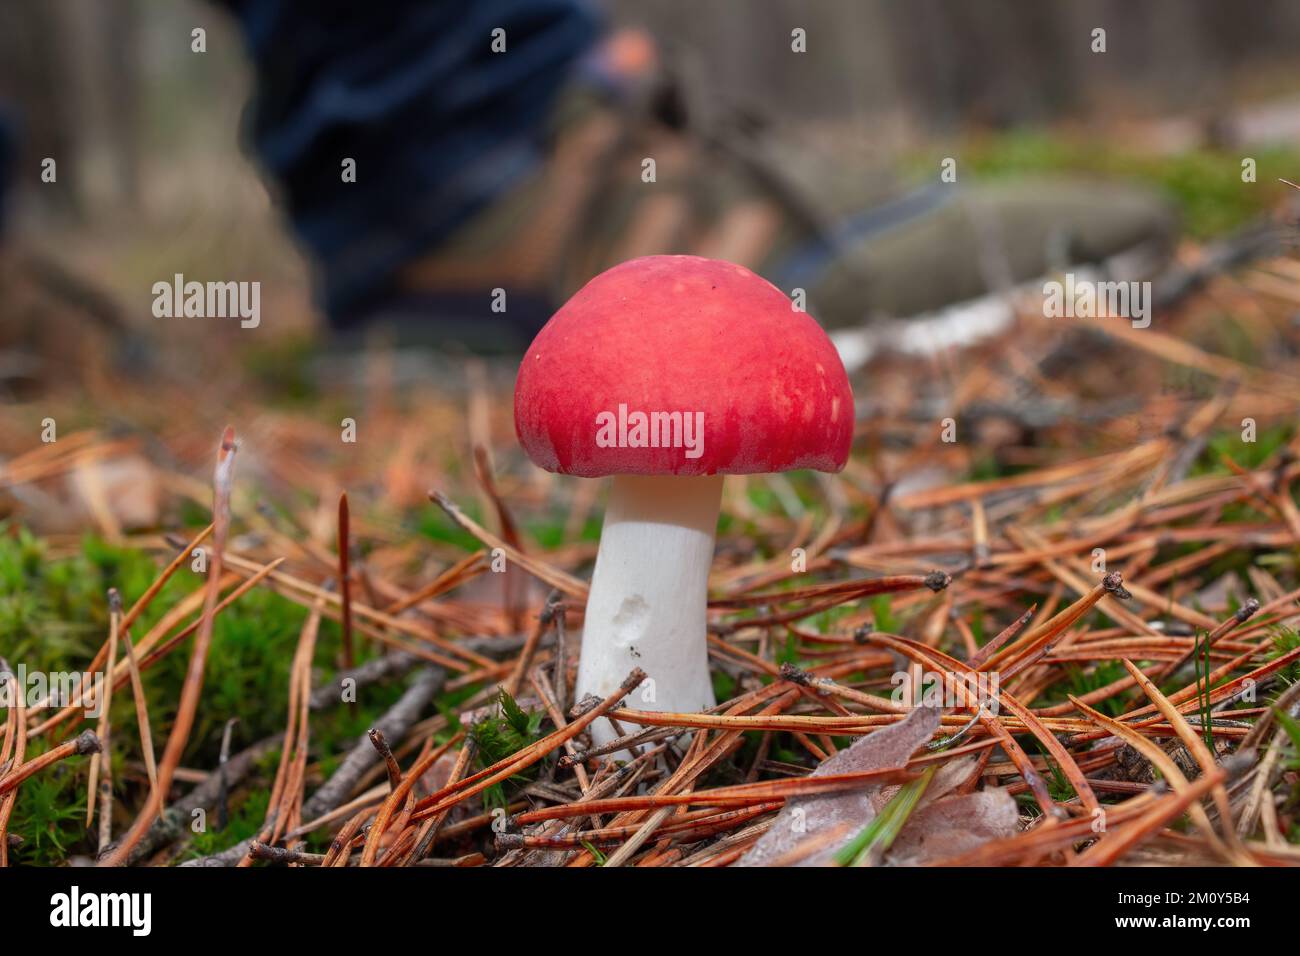 Red head, white stem, russula mushroom. Behind him, in the background, is the mushroom picker's shoe. Stock Photo